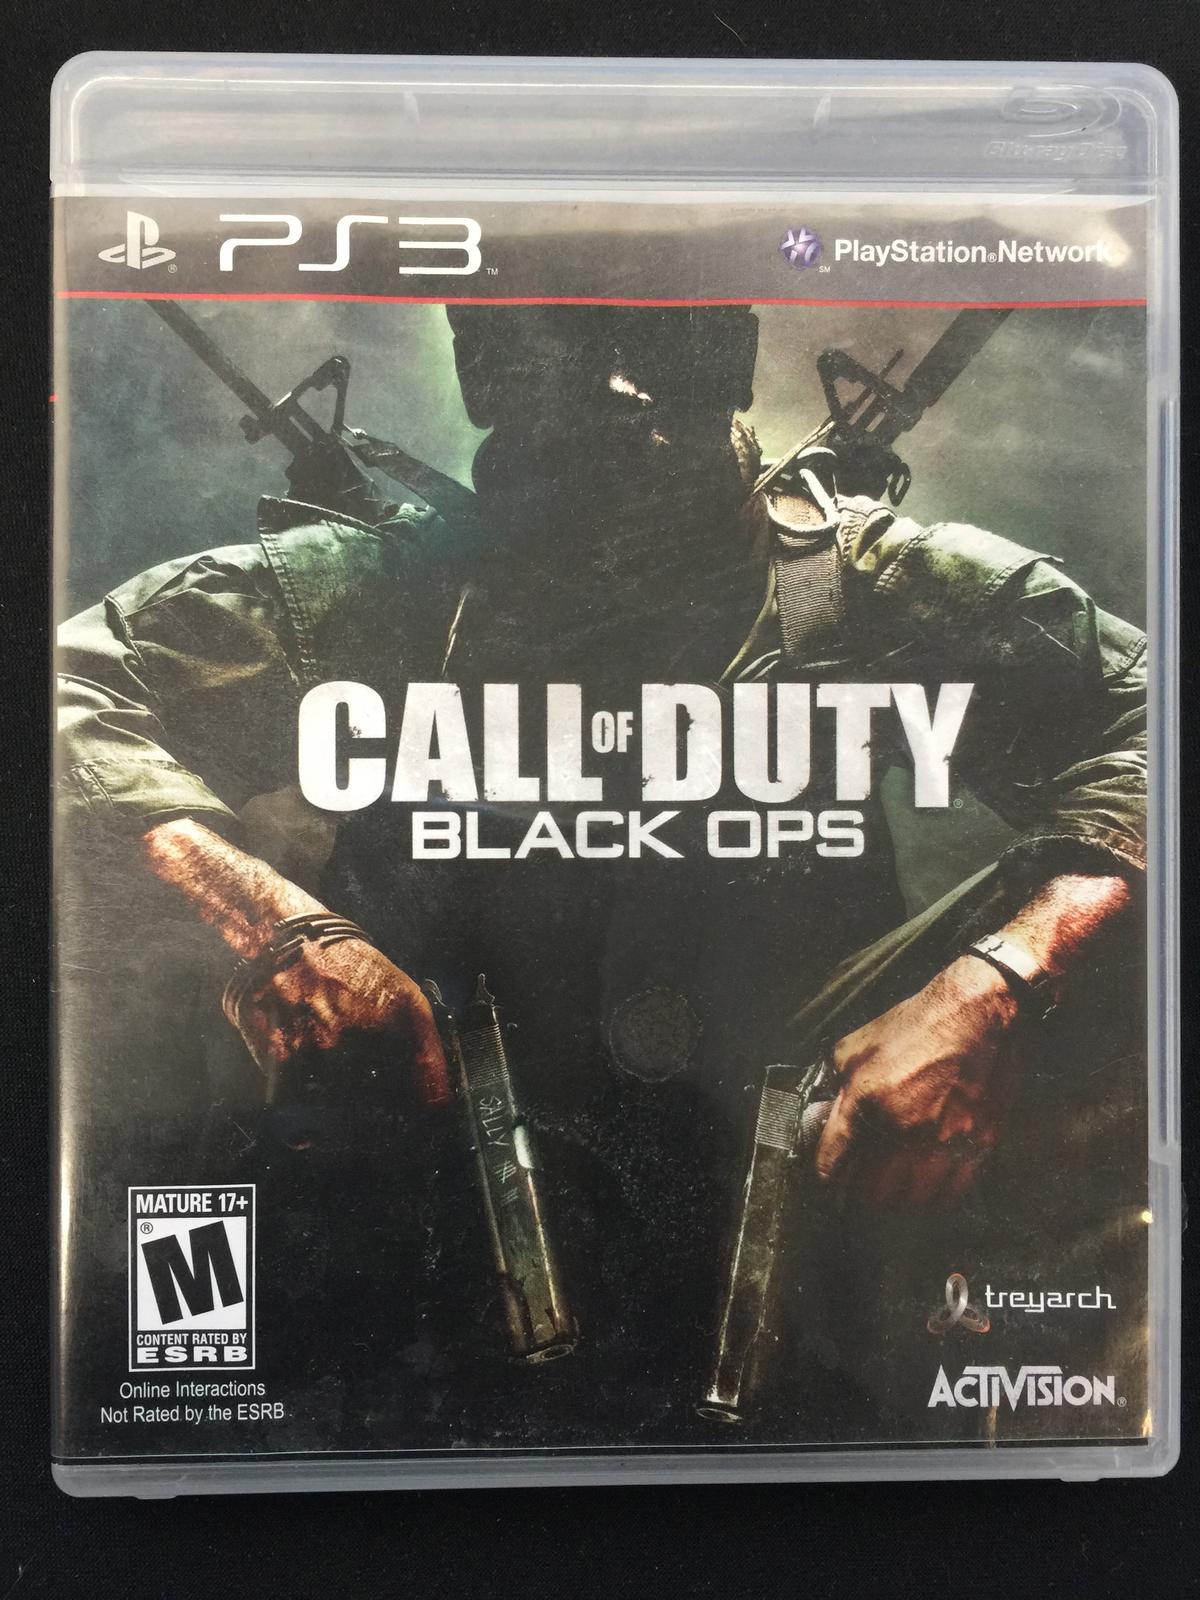 PS3 Playstation 3 Call of Duty Black Ops Video Game